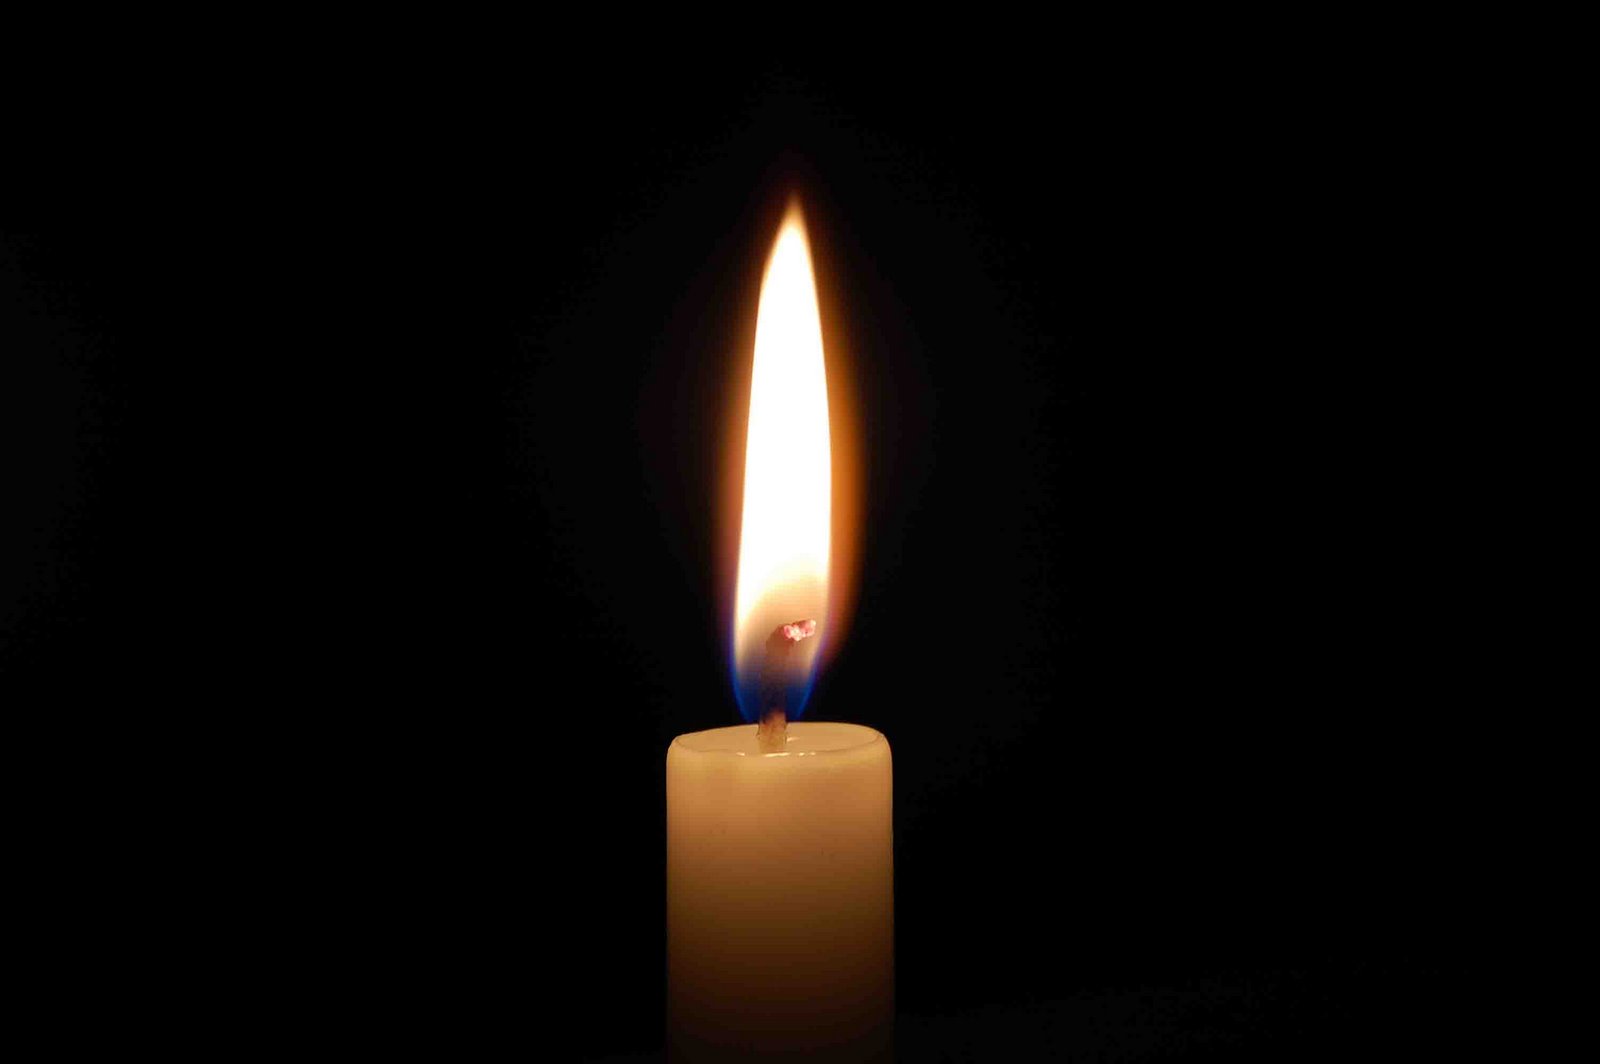 Does a candle really illumine the darkness? | Randal Rauser